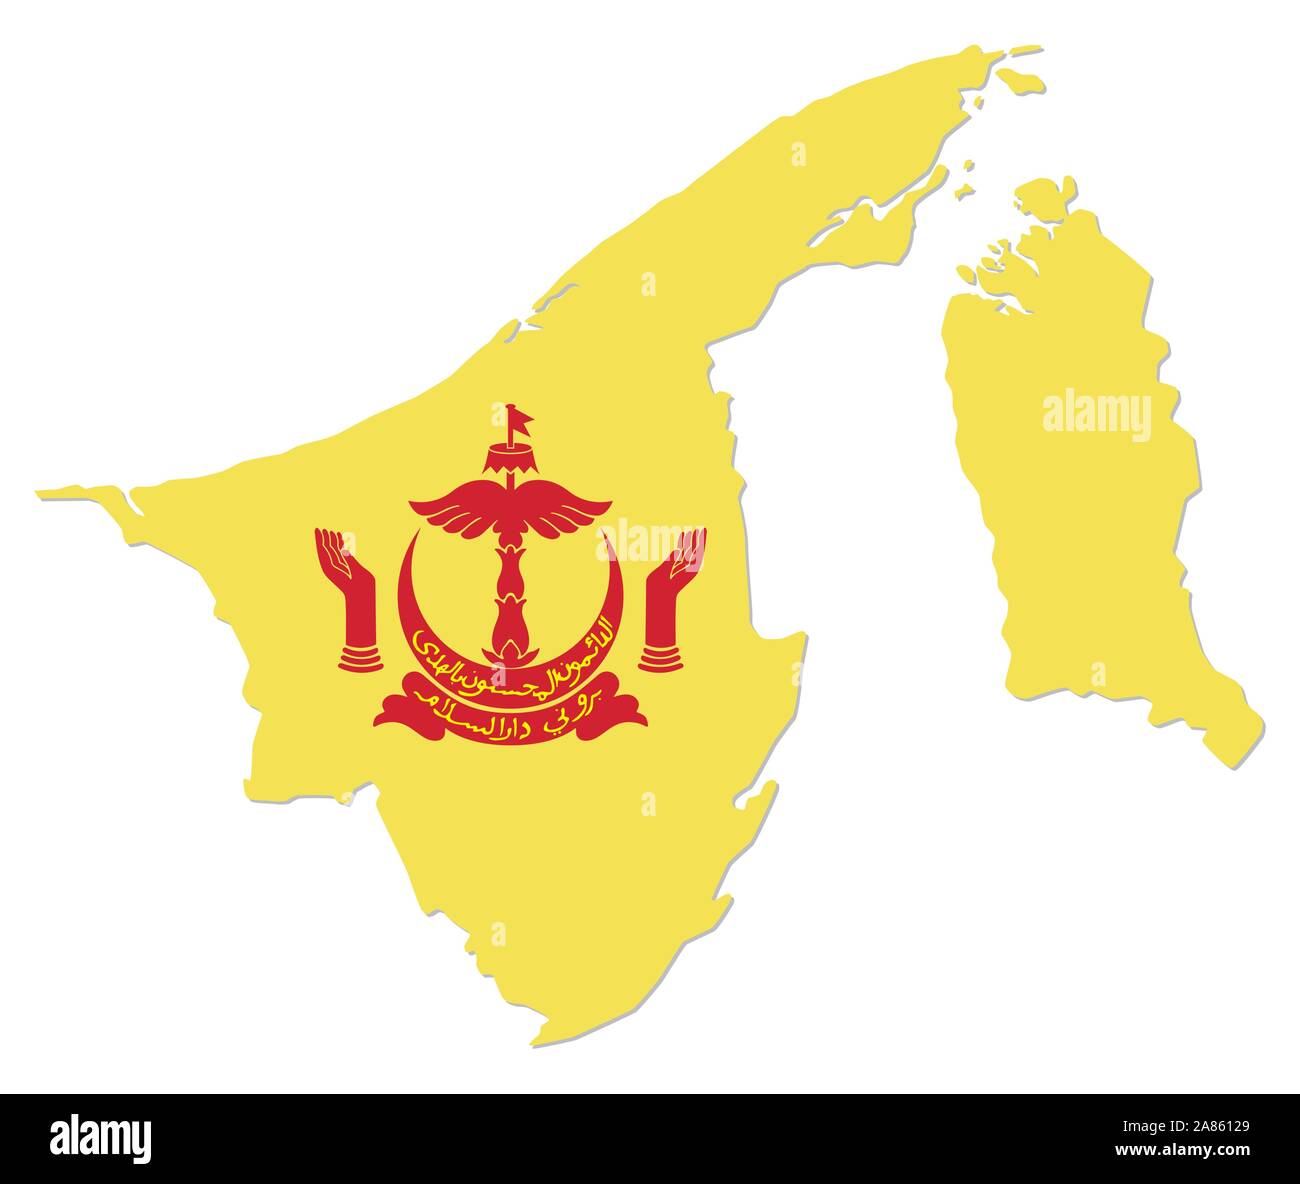 simple map of asian state brunei darussalam with coat of arms Stock Vector